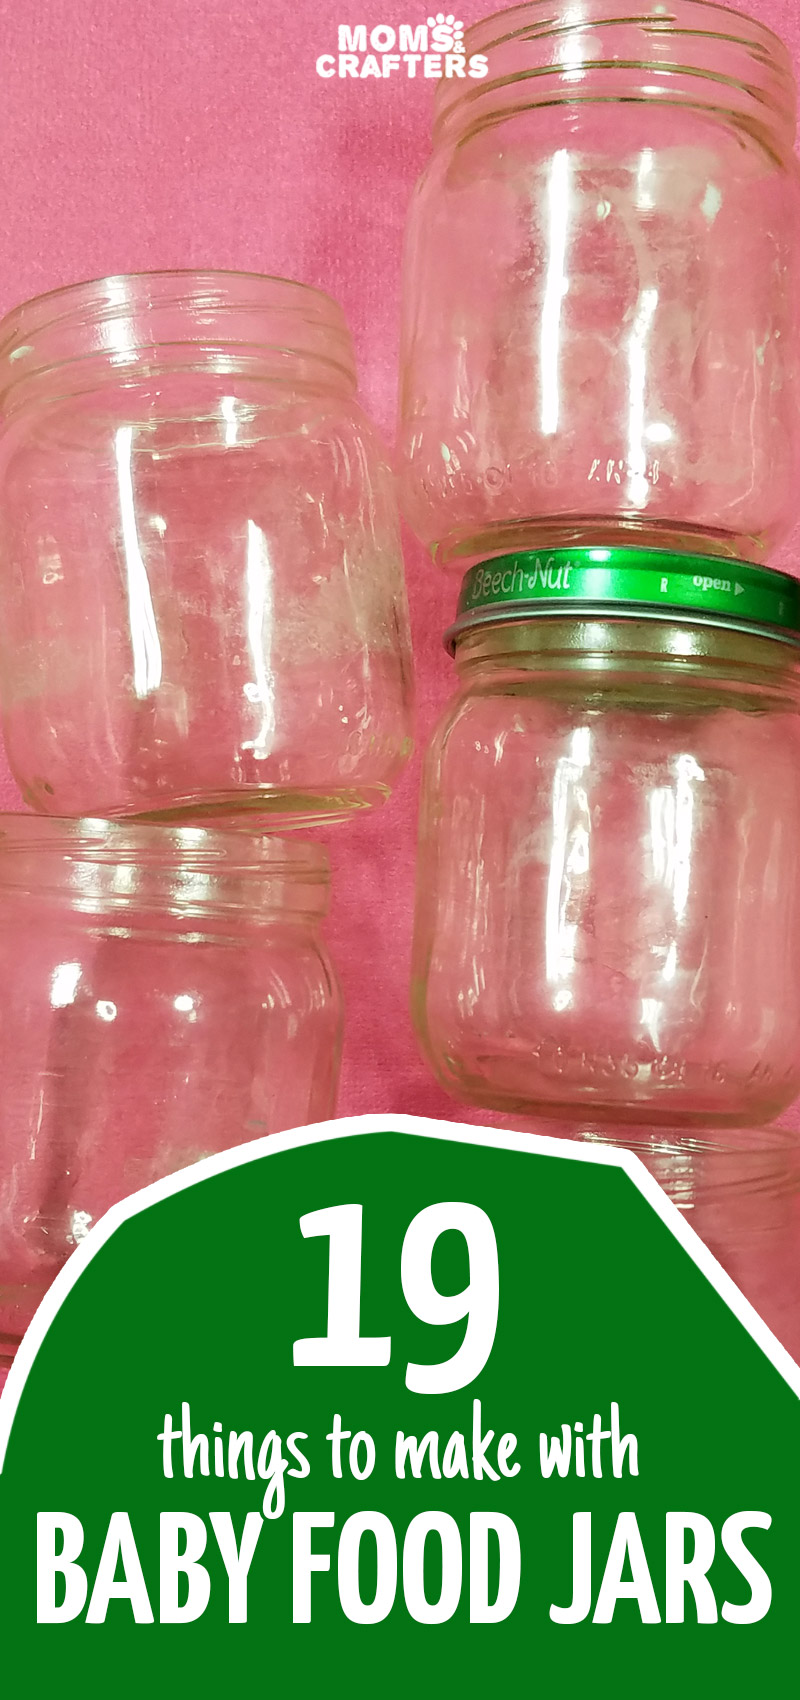 https://www.momsandcrafters.com/wp-content/uploads/2017/10/things-to-make-with-baby-food-jars-v.jpg.webp